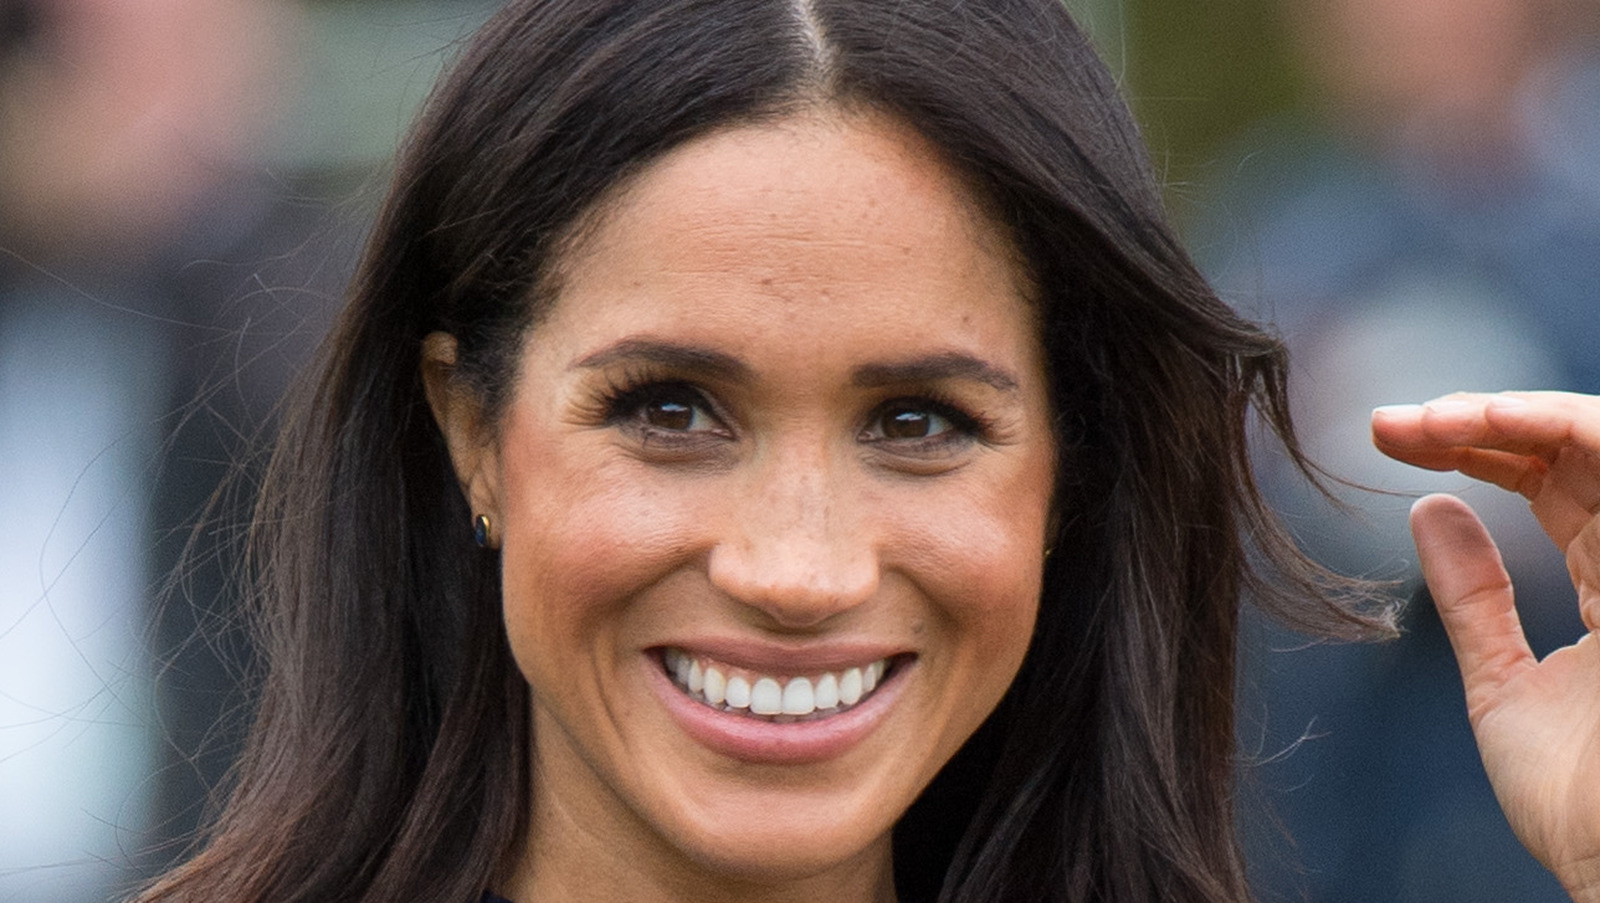 The Most Popular Shirts Spotted On Meghan Markle